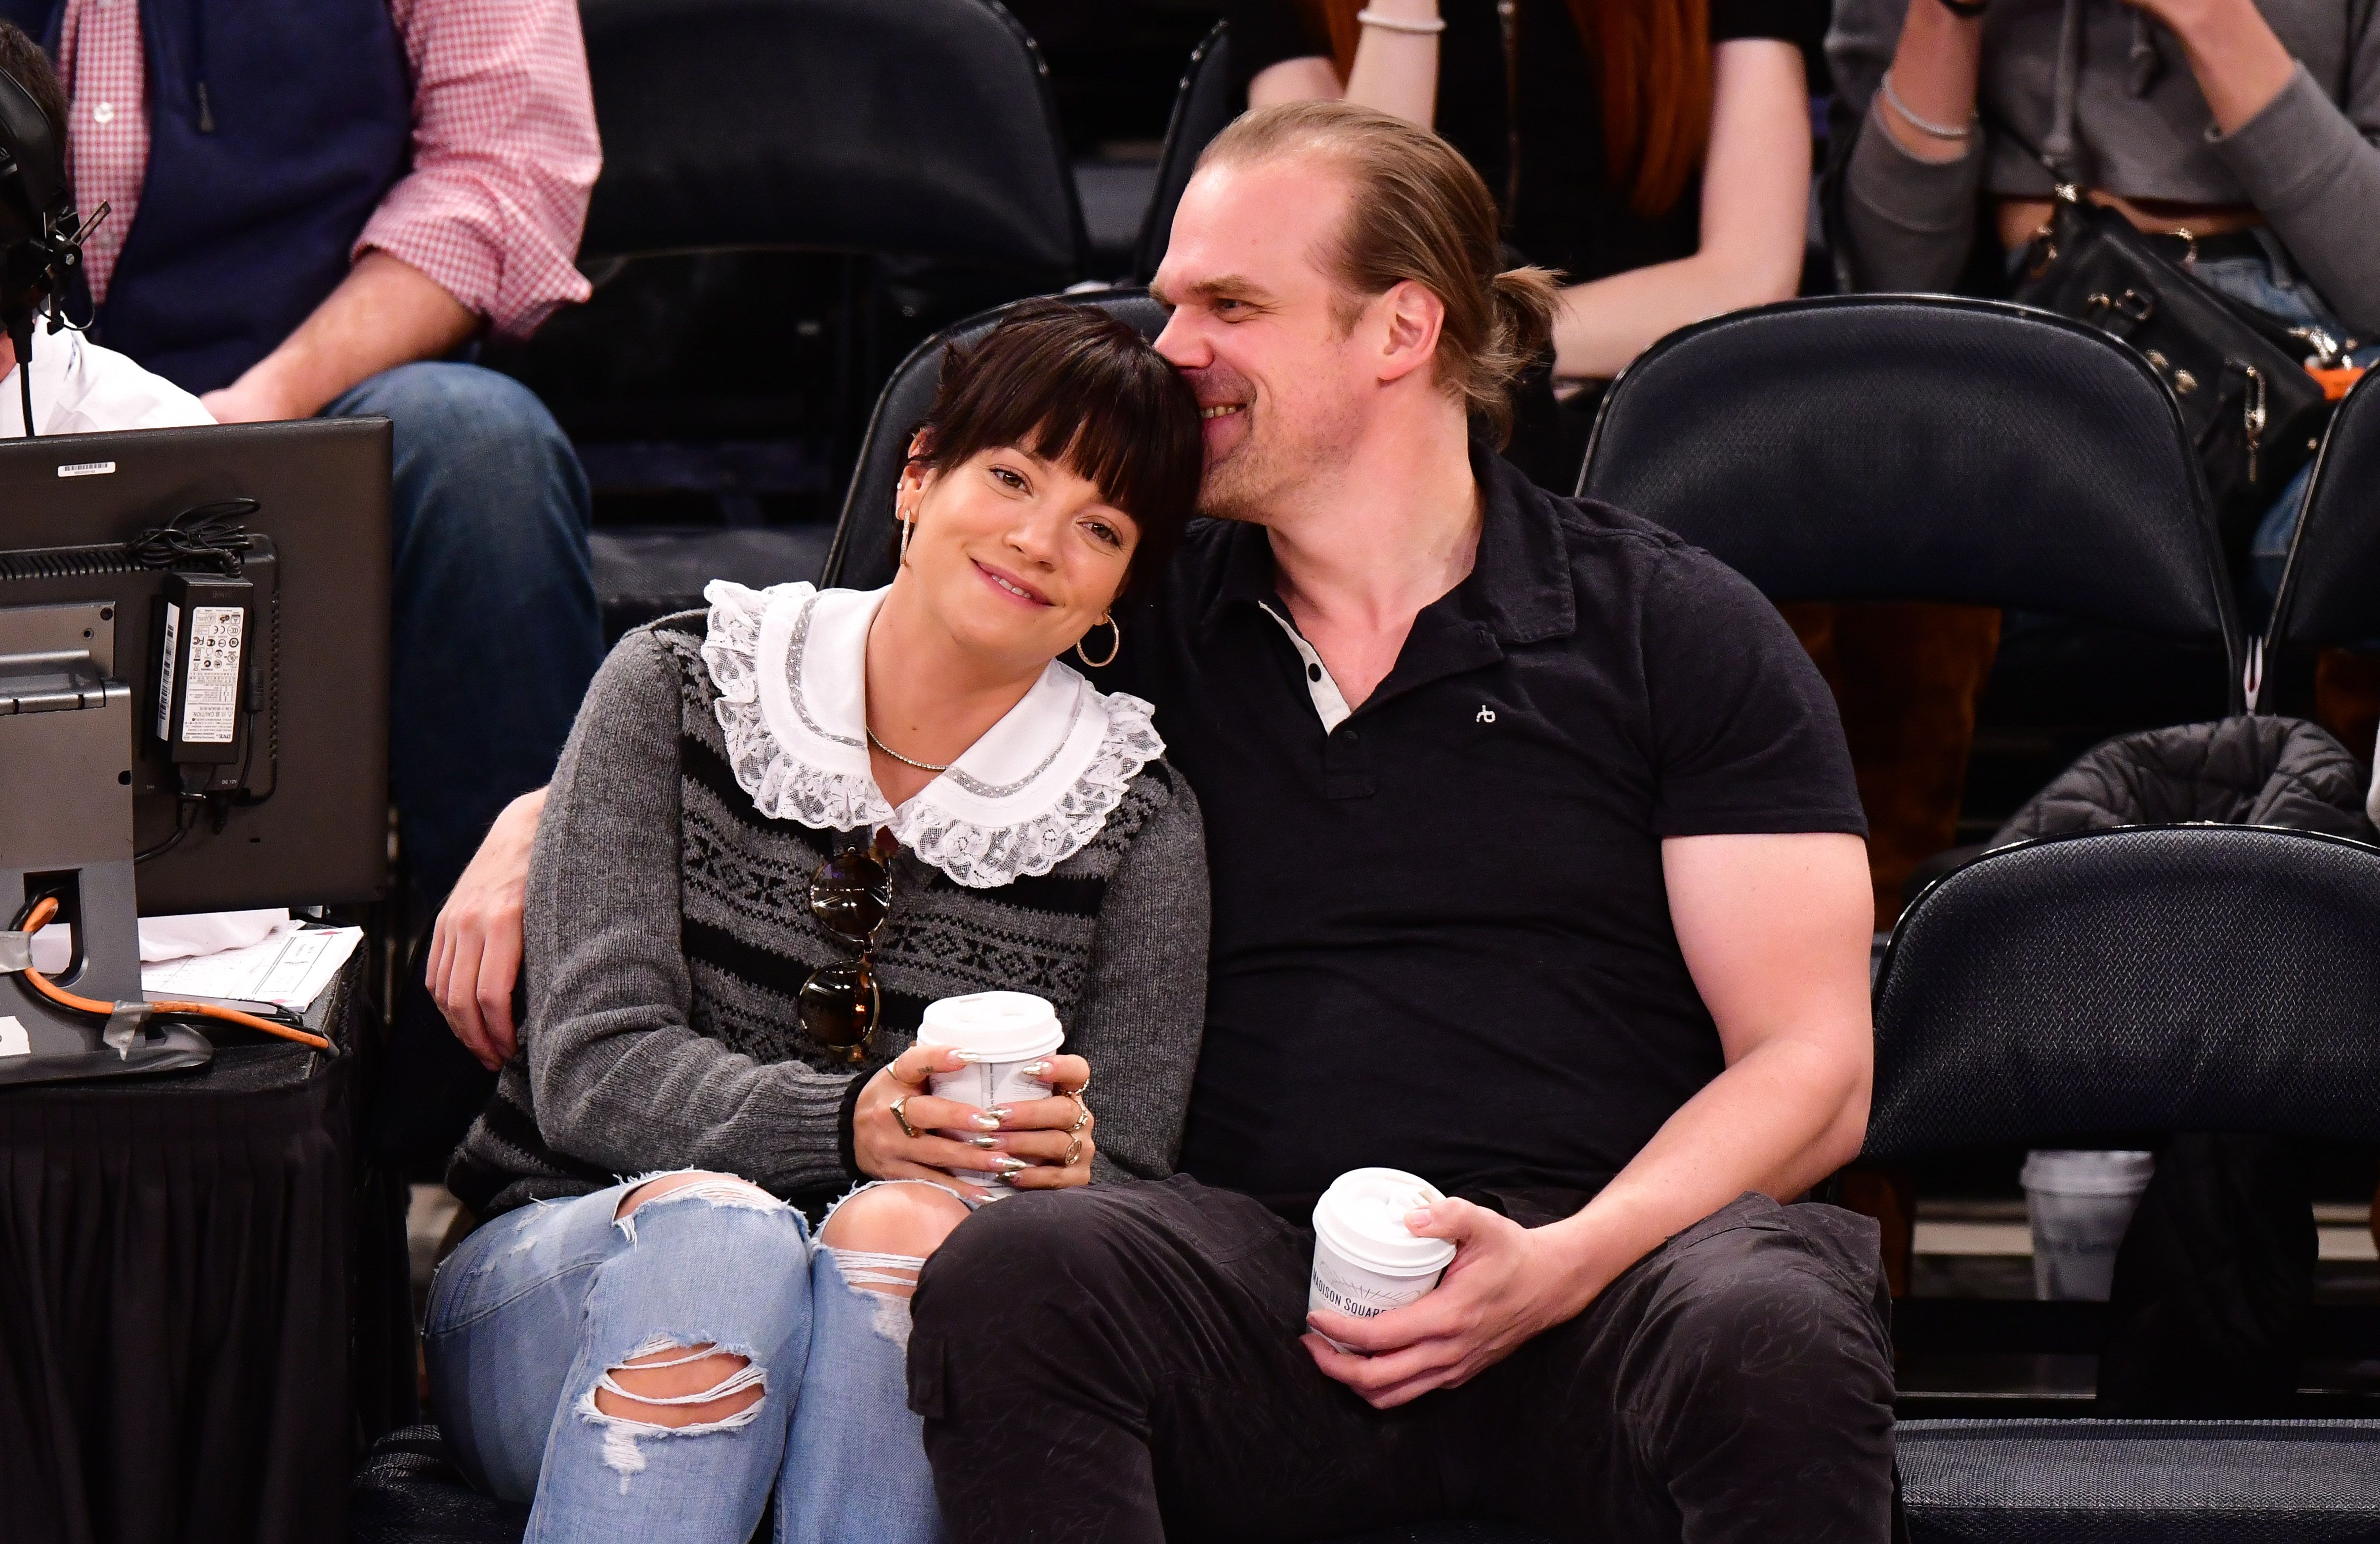 Lily Allen and David Harbour at the New York Knicks v New Orleans Pelicans preseason game on October 18, 2019, in New York City | Photo: James Devaney/Getty Images